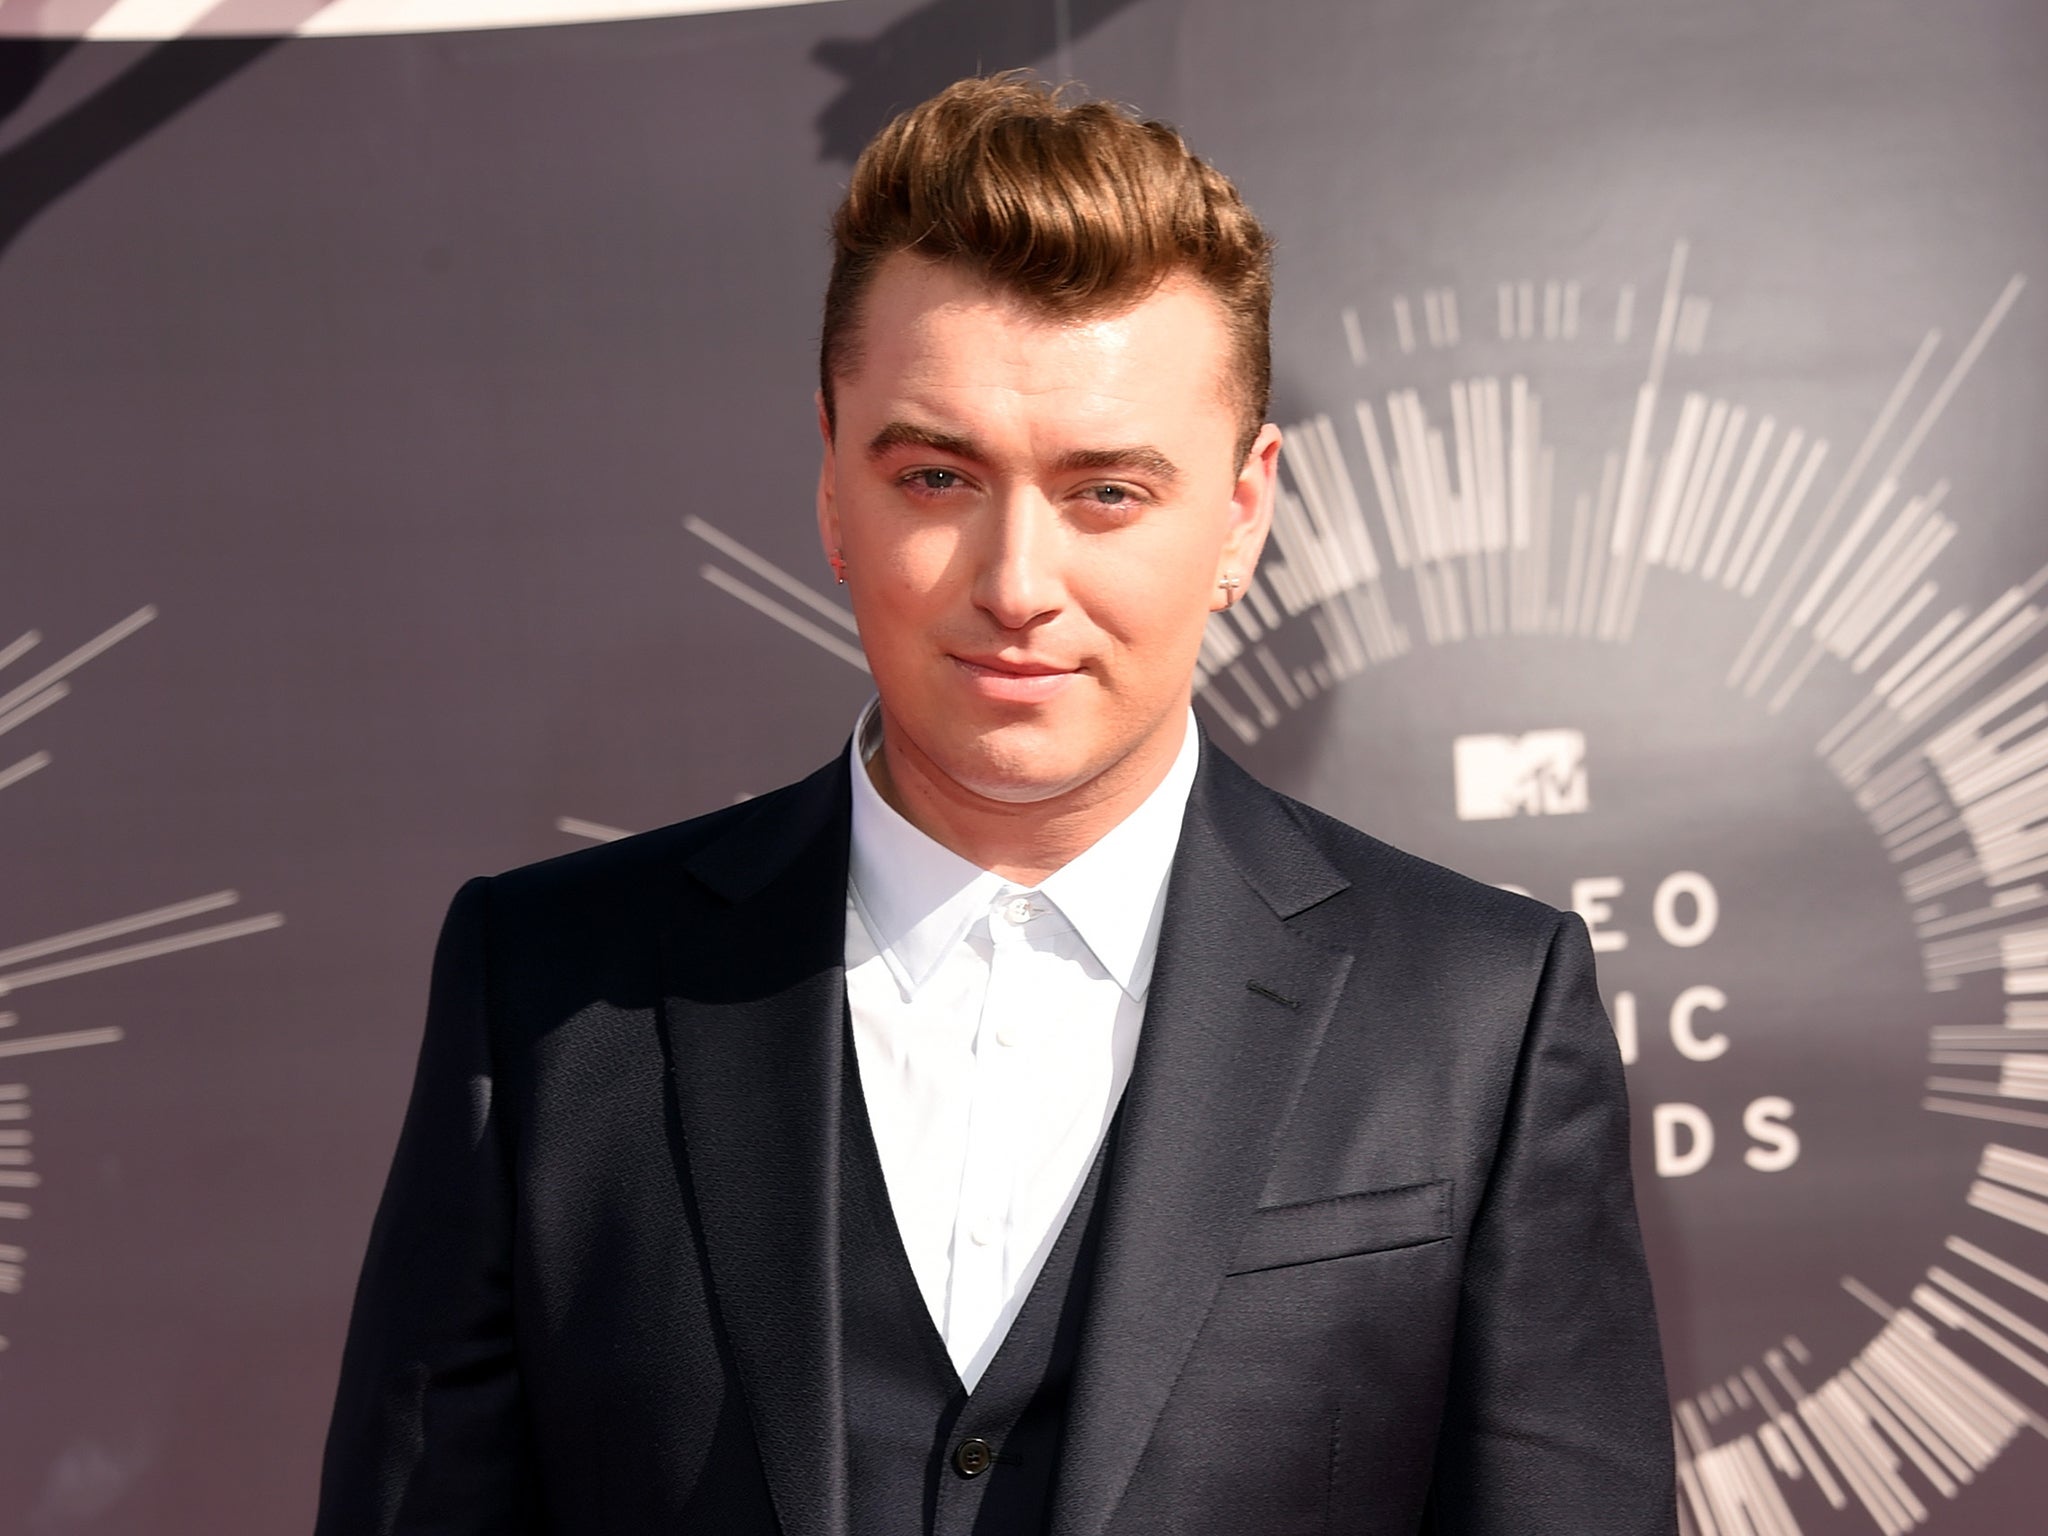 Sam Smith has listed Tom Petty and Jeff Lynne as co-writers on 'Stay With Me' after a copyright dispute